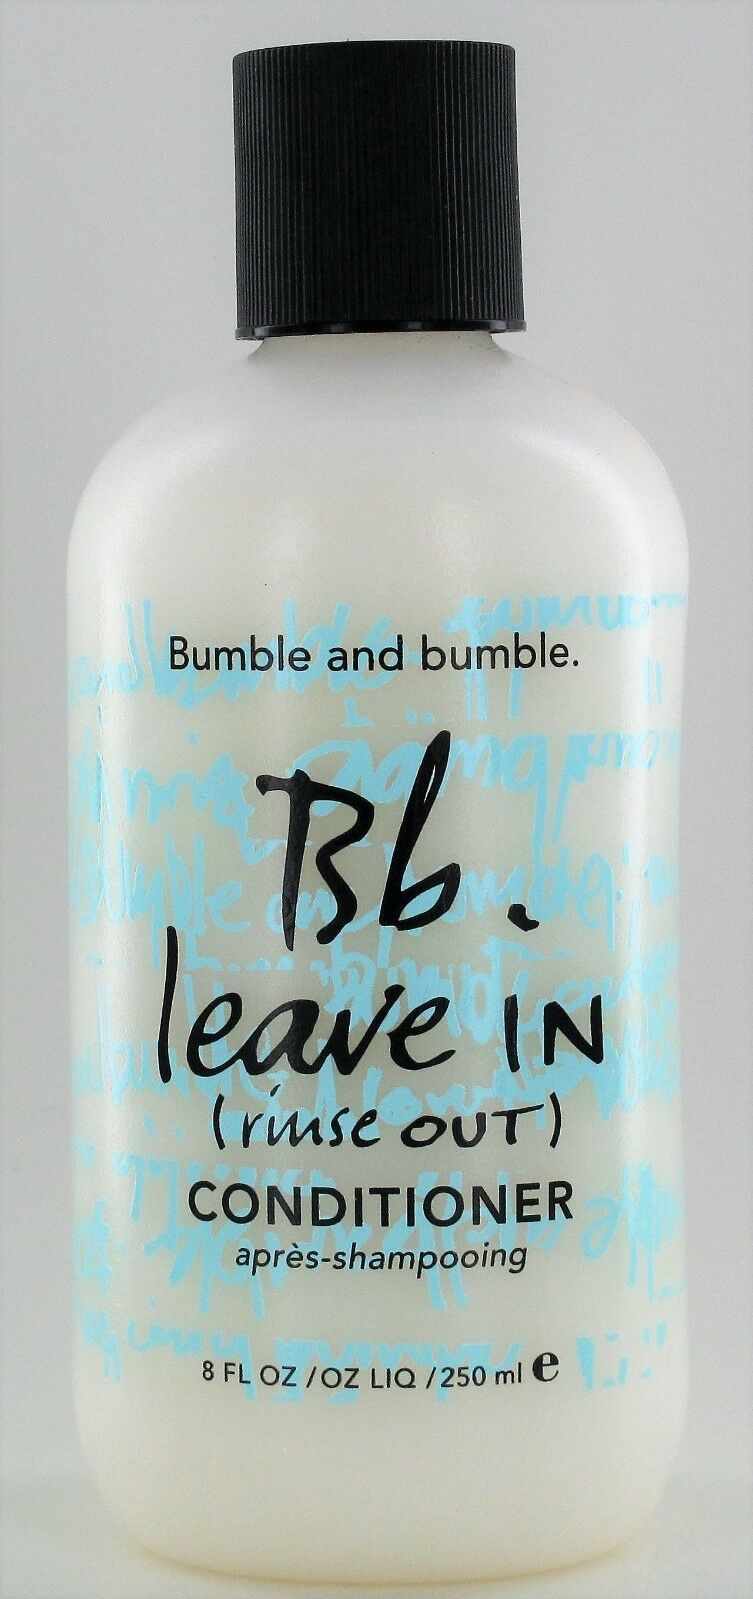 Bumble And Bumble Leave In (Rinse Out) Conditioner, 8 oz. / 250ml